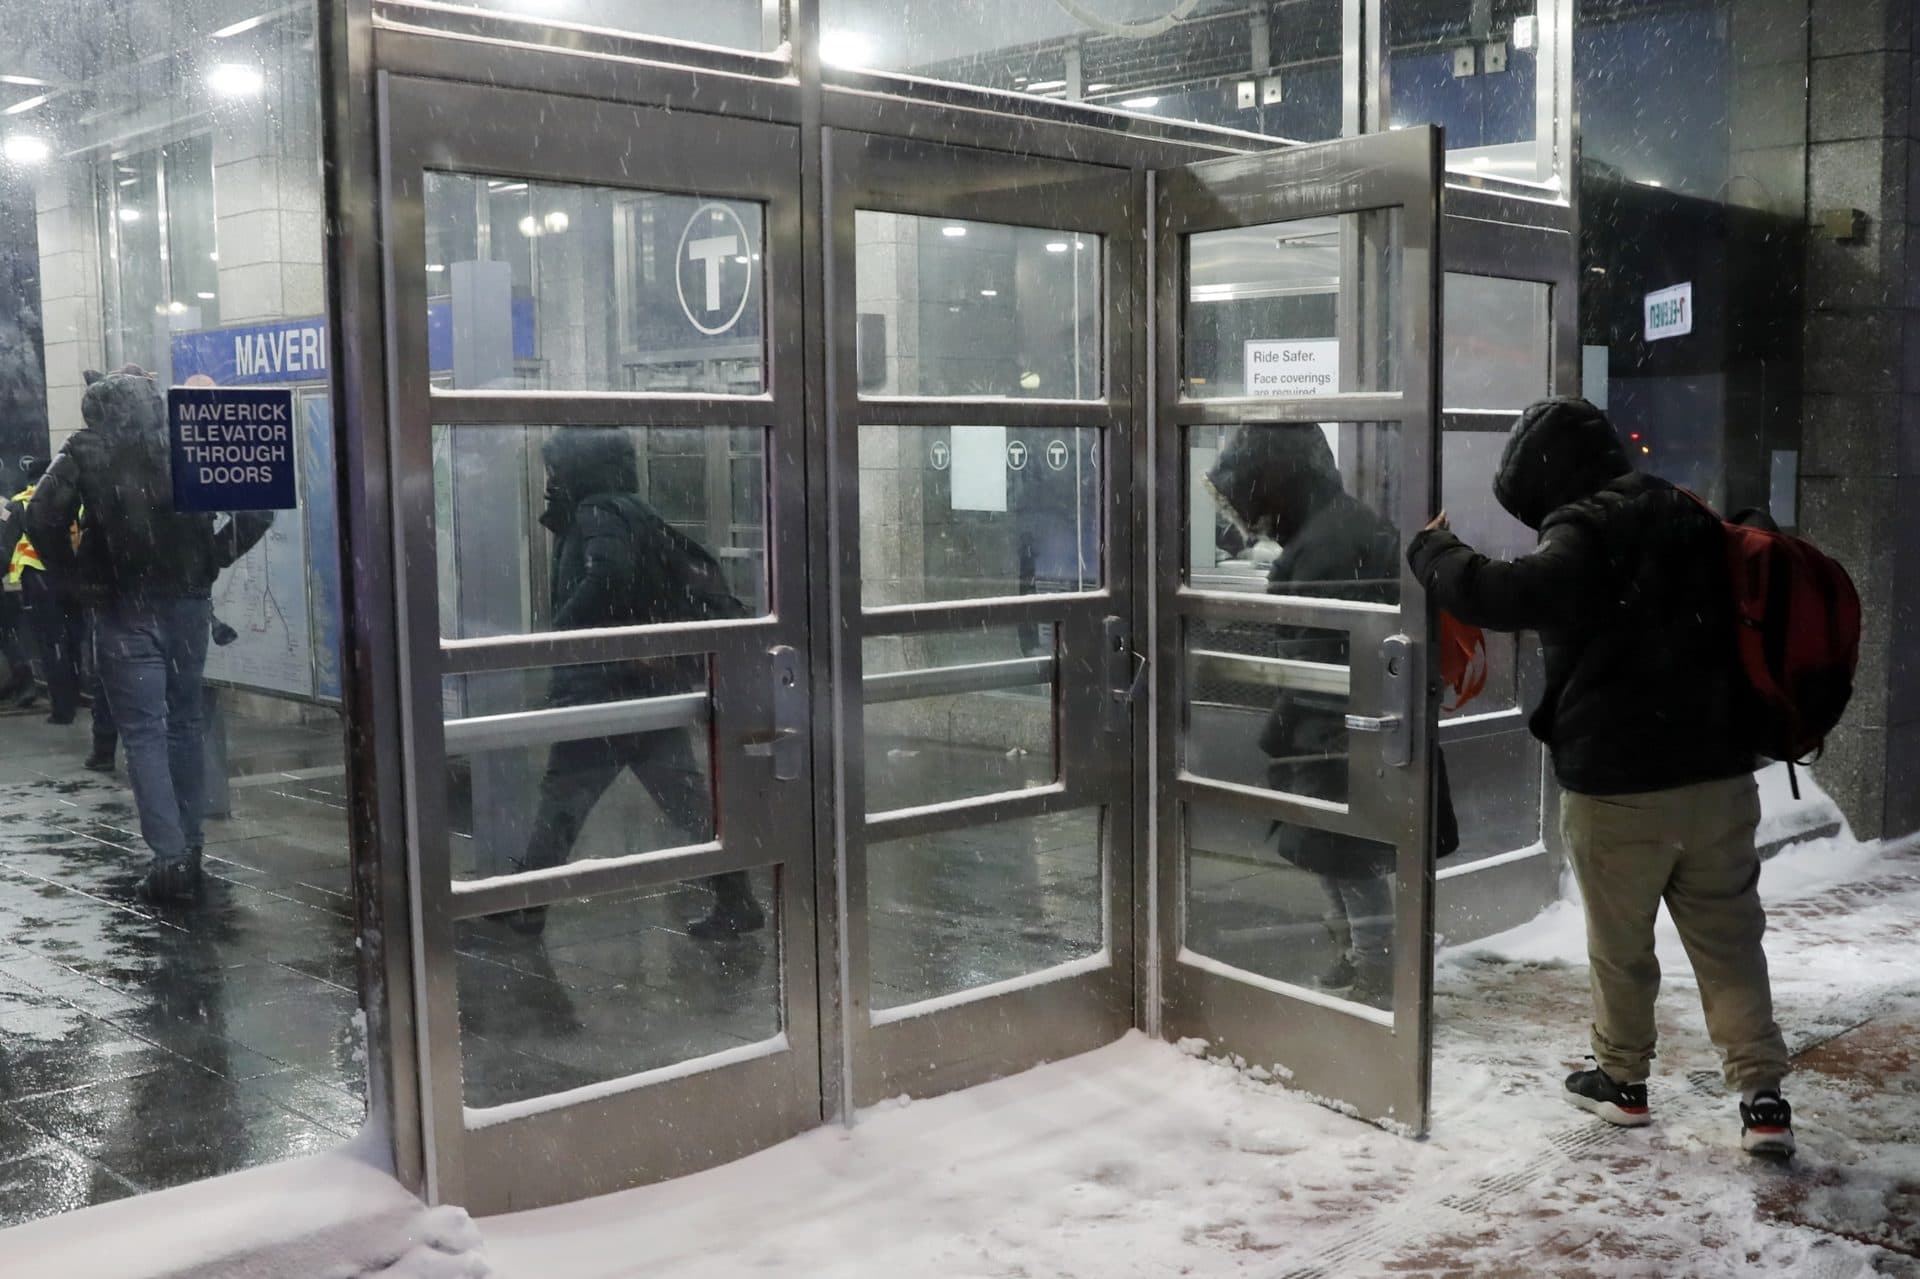 People enter the Maverick T station during Saturday's snowstorm. (Michael Dwyer/AP)